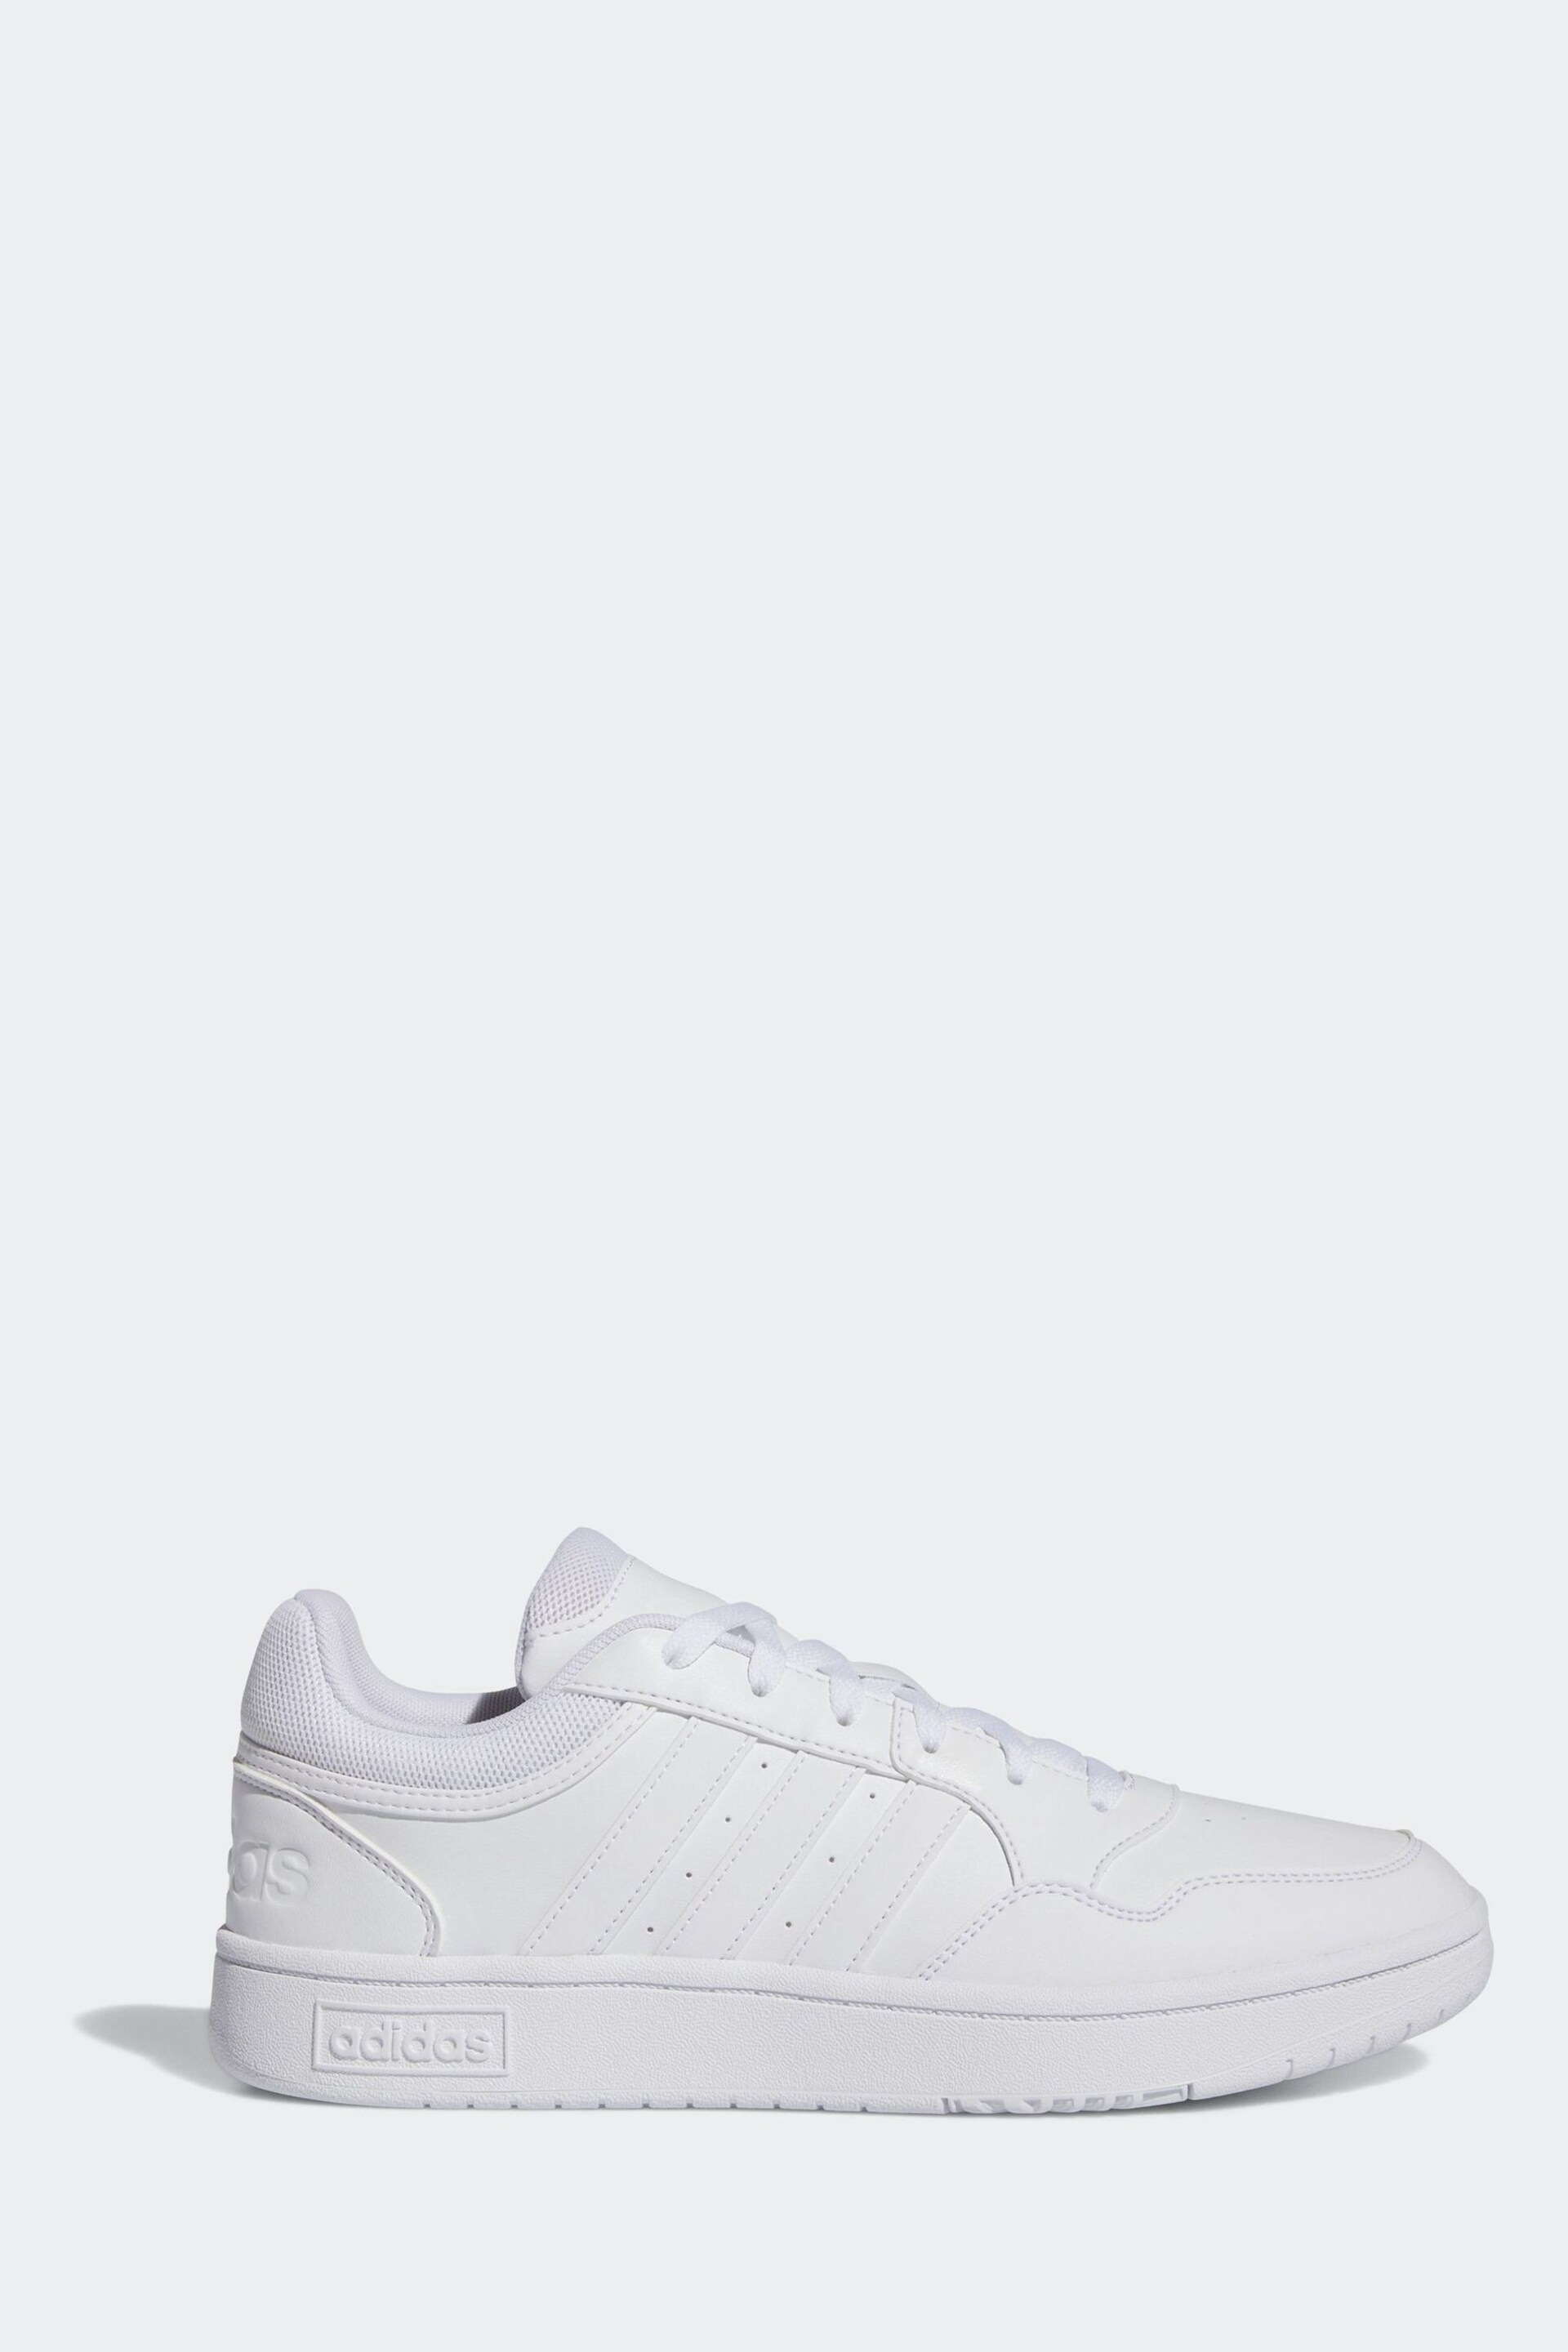 adidas White Originals Hoops 3.0 Low Classic Vintage Trainers - Image 1 of 9